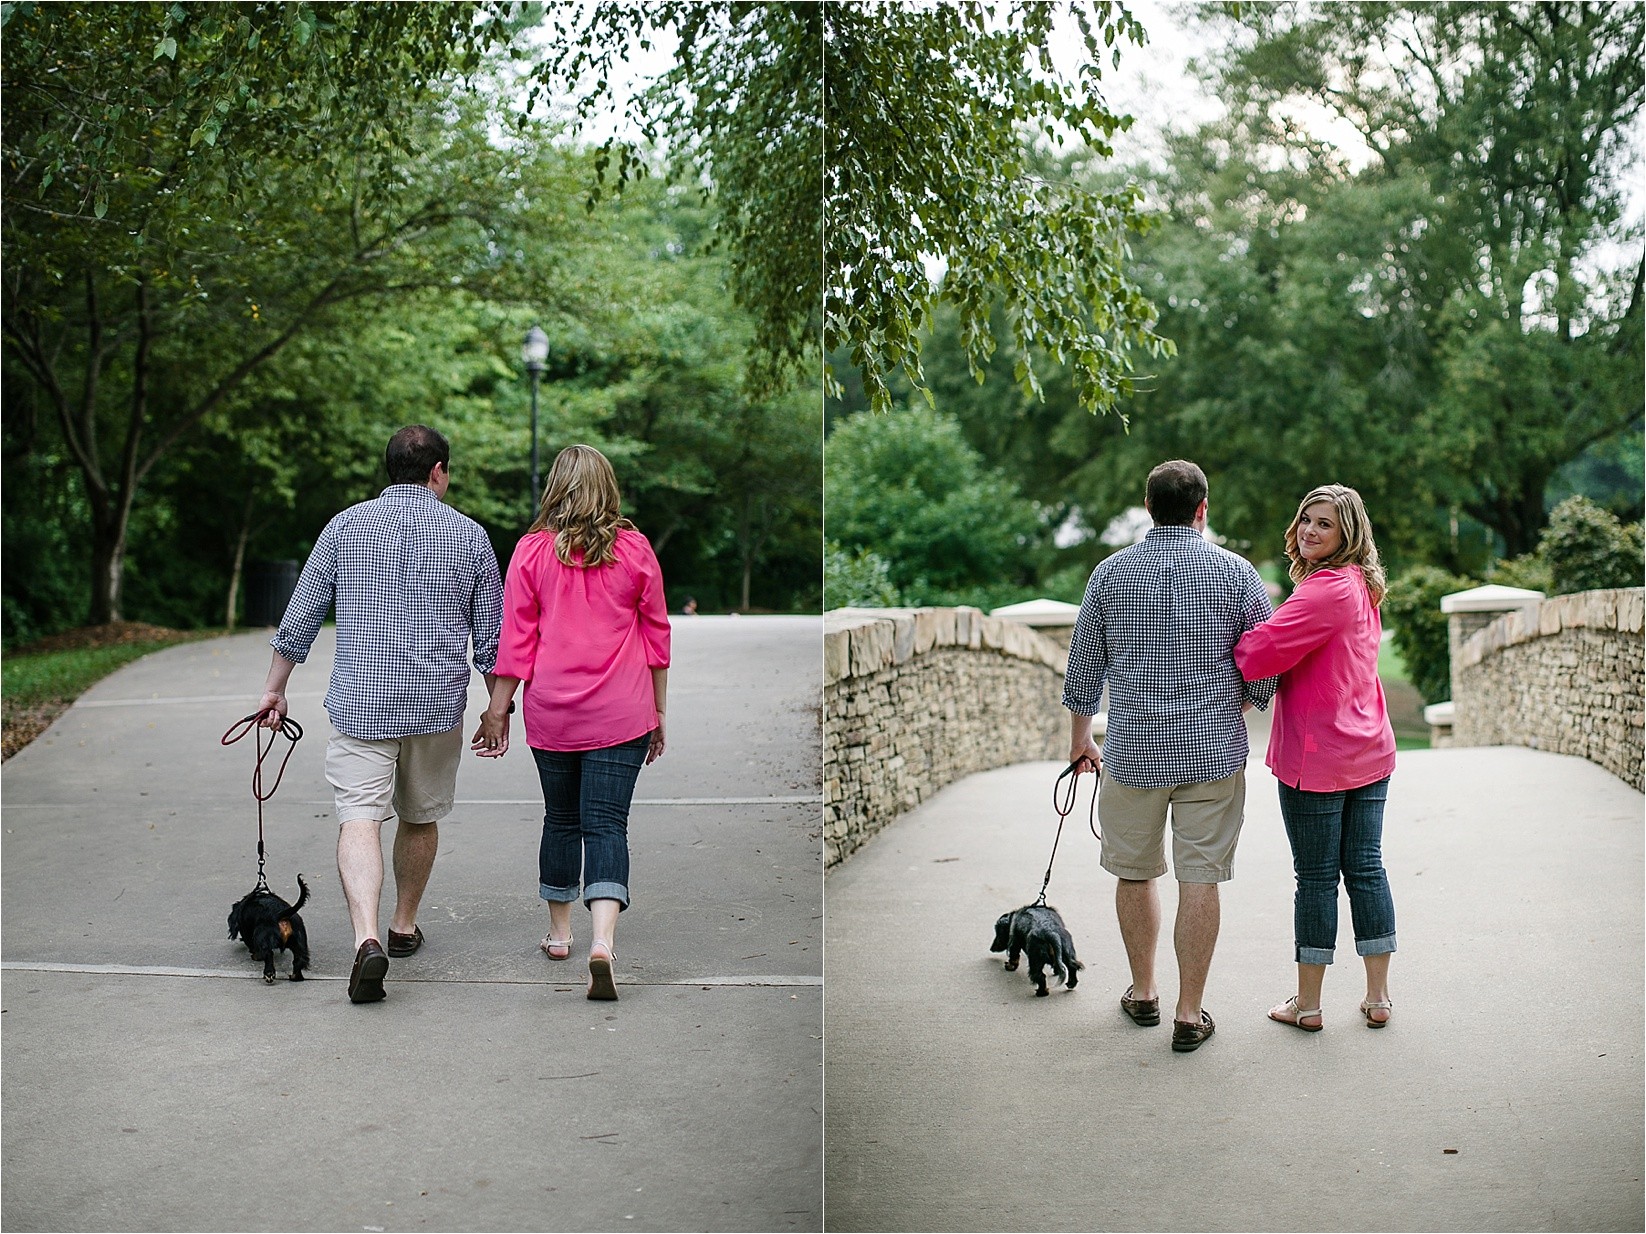 taking a walk in the park at Catherine & Jordan's engagement session at freedom park and marshall park in Charlotte North Carolina